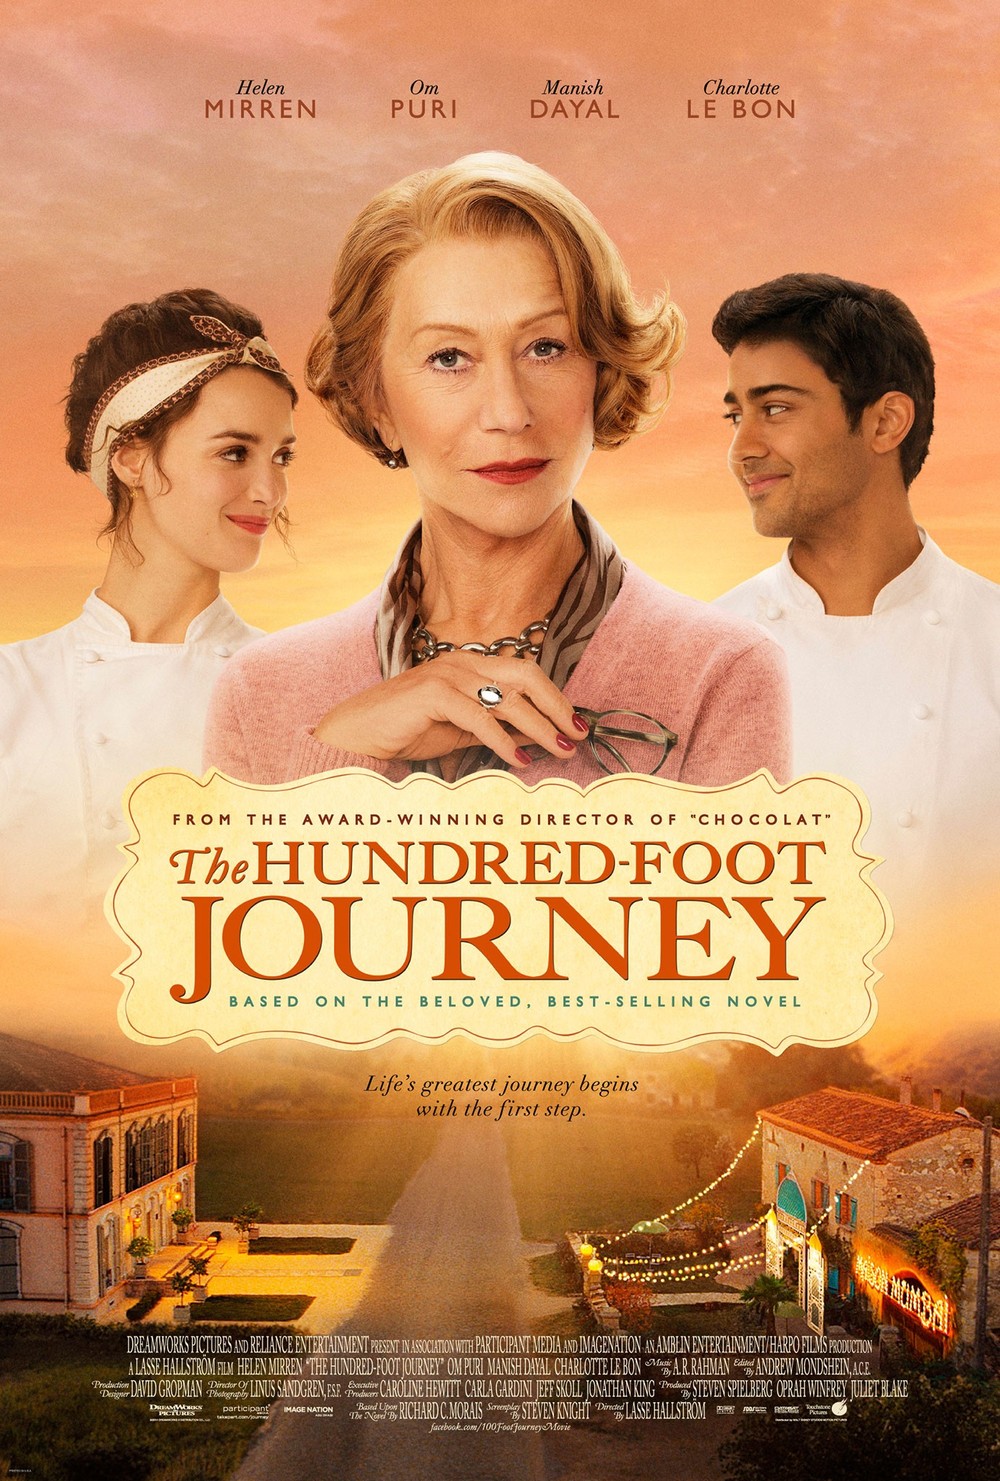 is the 100 foot journey on amazon prime